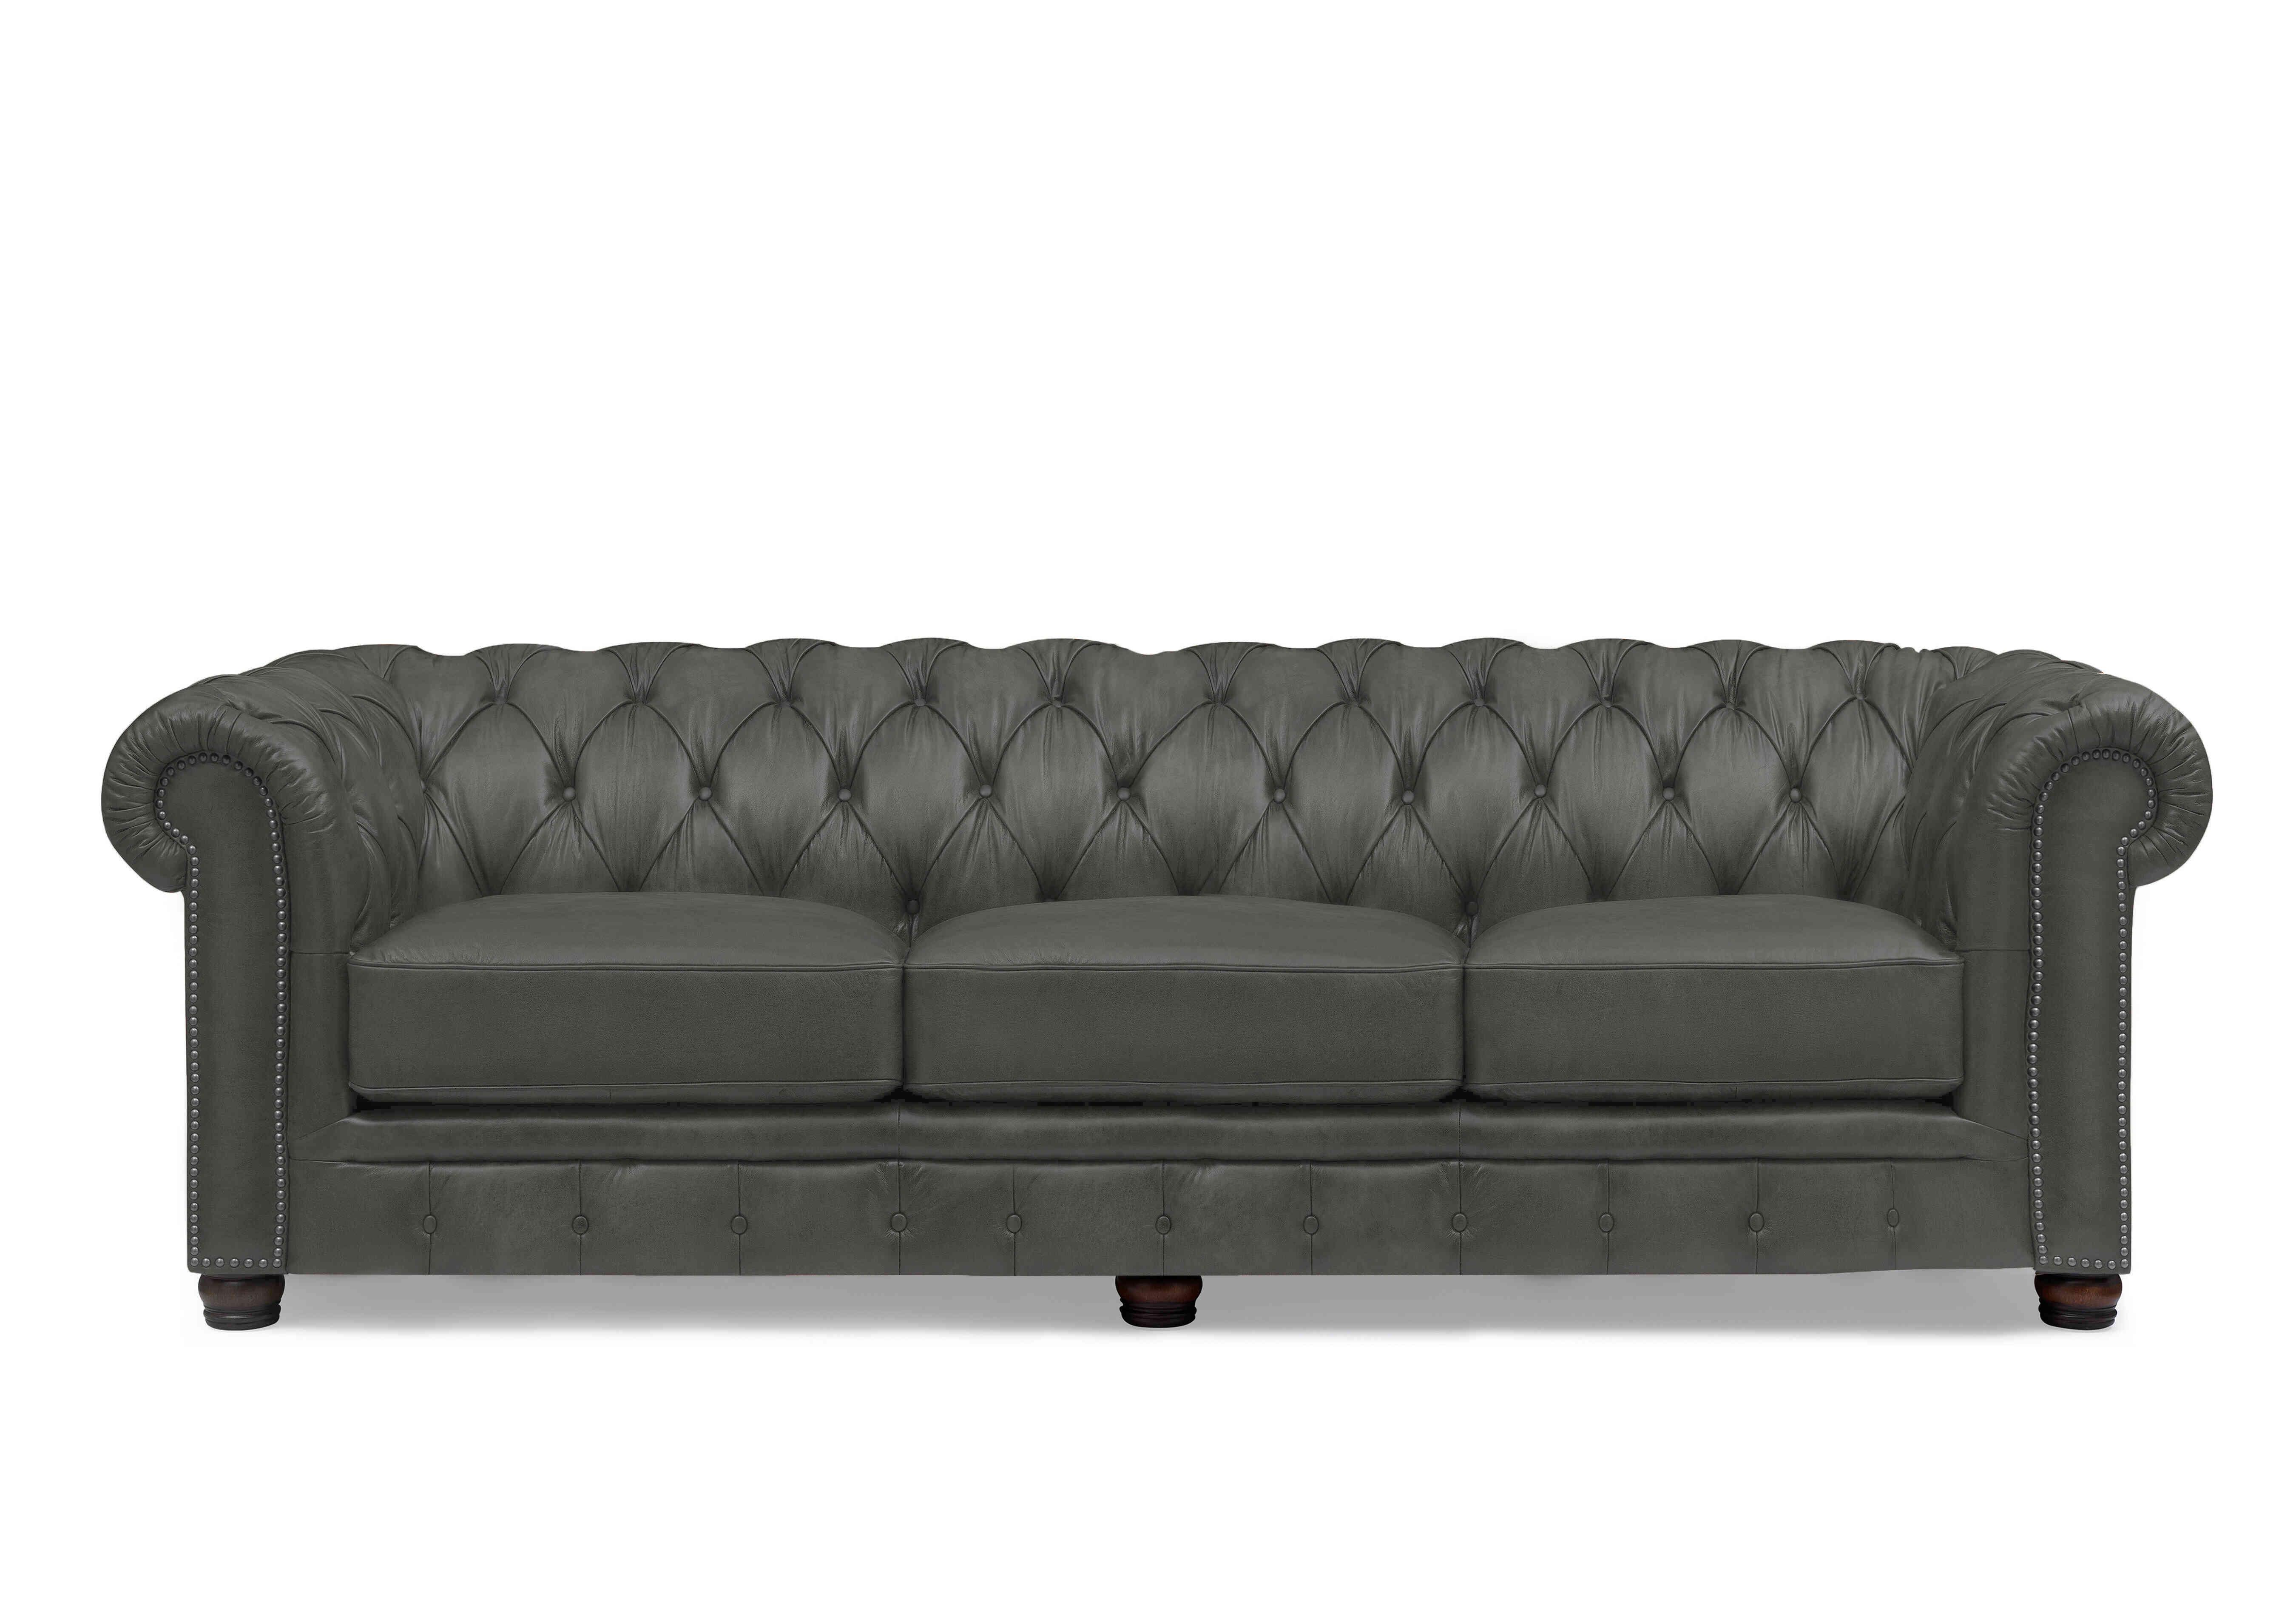 Shackleton 4 Seater Leather Chesterfield Sofa with USB-C in X3y2-1966ls Granite on Furniture Village